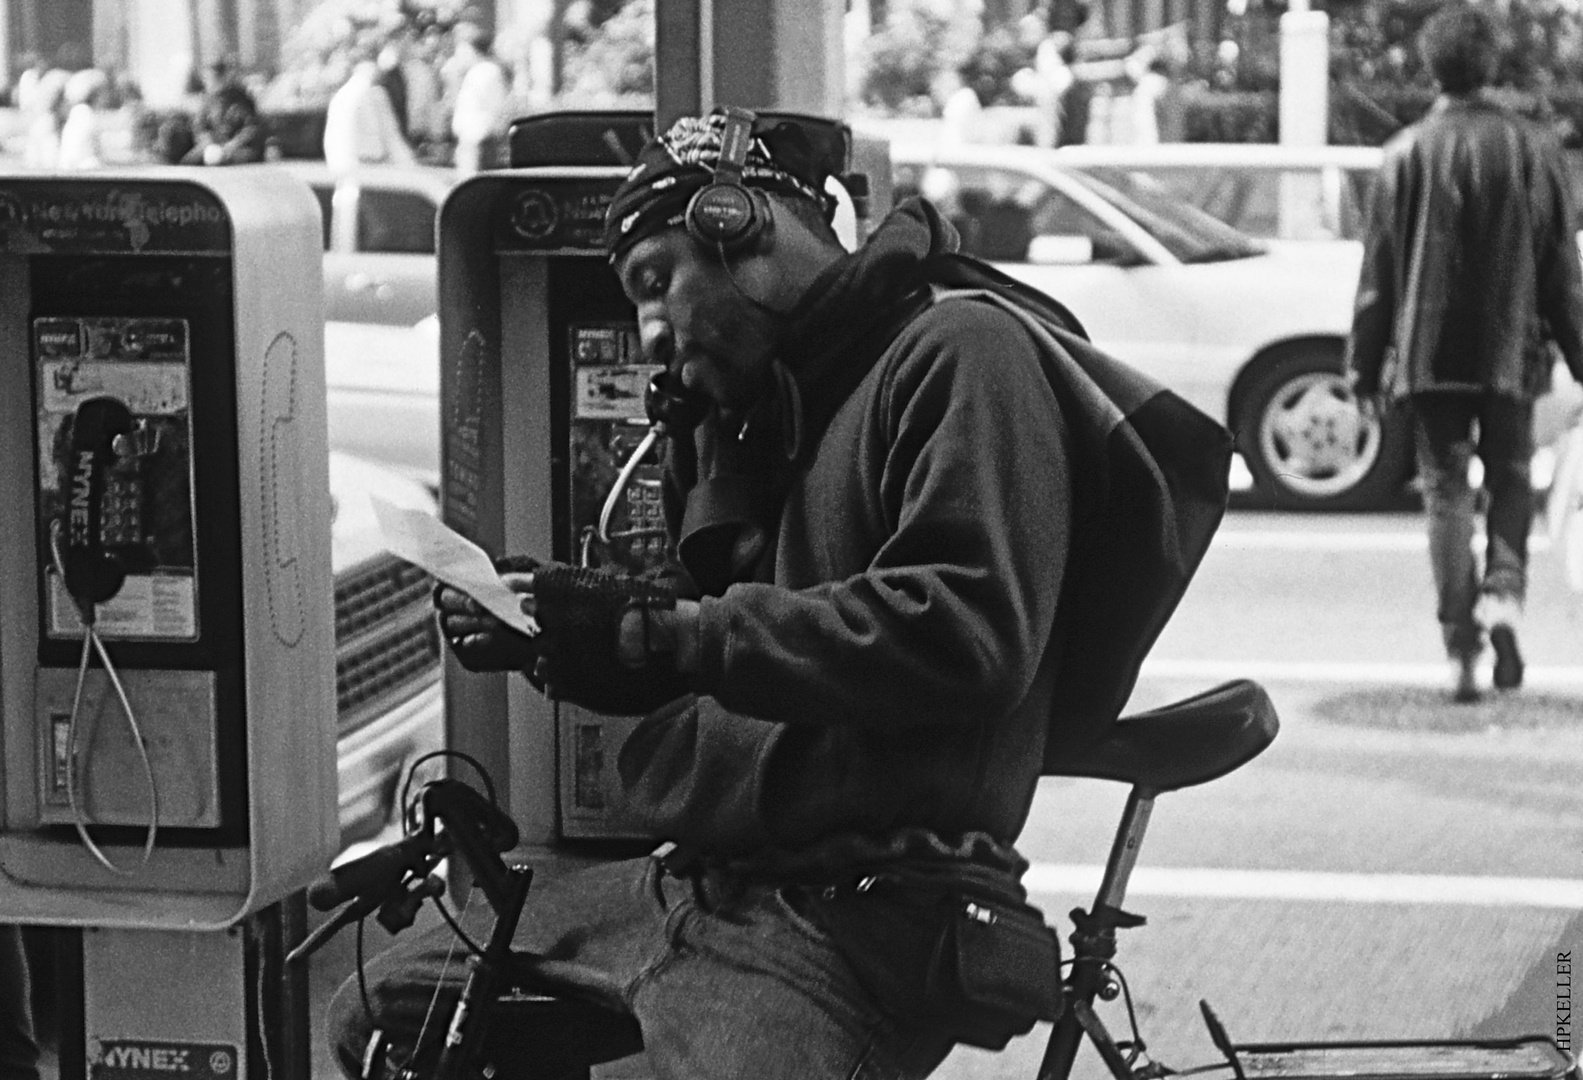 Some years ago in NYC, ...bike messenger before the cell phone era.